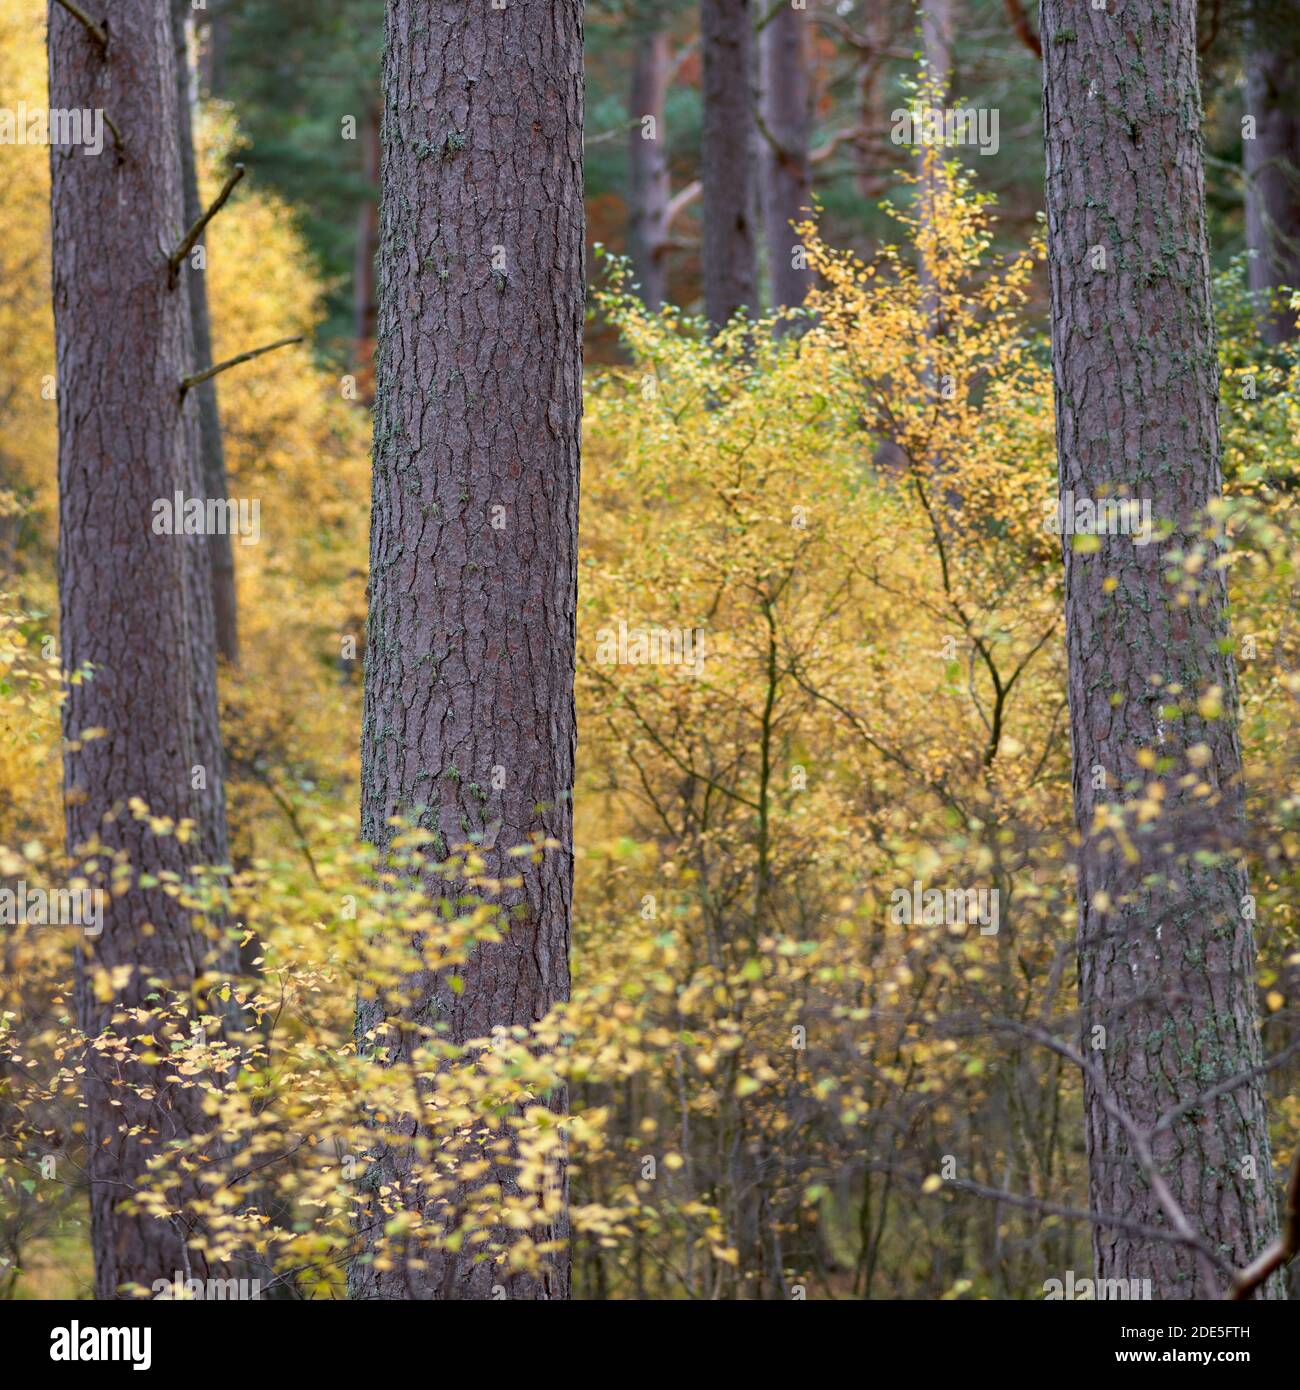 Silver Birch trees in autumn colours and pine tree trunks, near Dinnet, Aberdeenshire, Scotland. Stock Photo